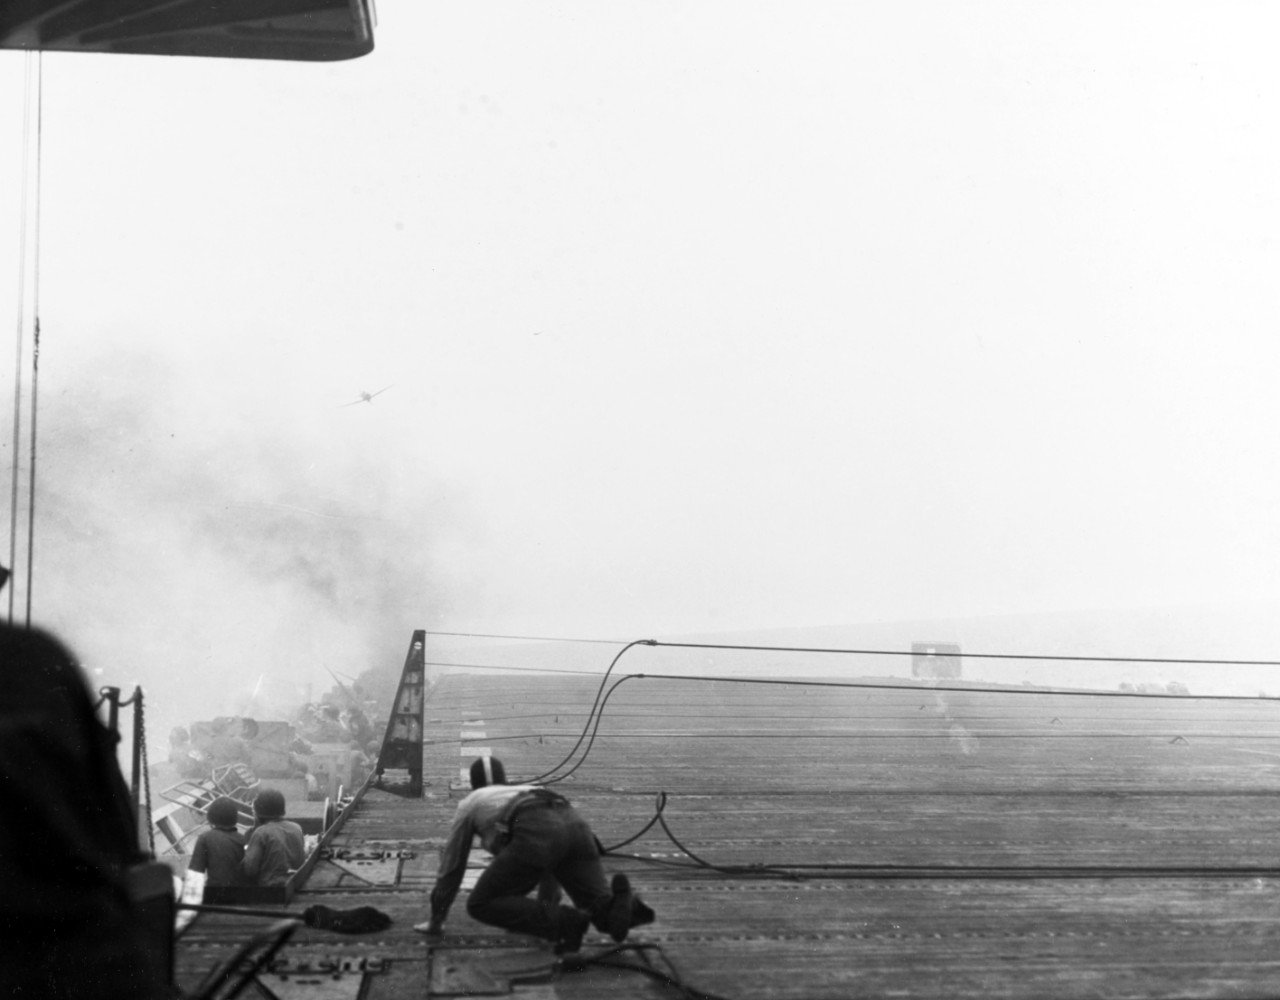 80-G-288881:  USS White Plains (CVE-66), October 25, 1944.  Battle of Leyte Gulf, Battle off Samar.  Japanese “Zeke” fighter attacking USS White Plains (CVE-66) off Samar.  Note, the plane crashed just off the ship’s port side.  Official U.S. Navy Photograph, now in the collections of the National Archives.  